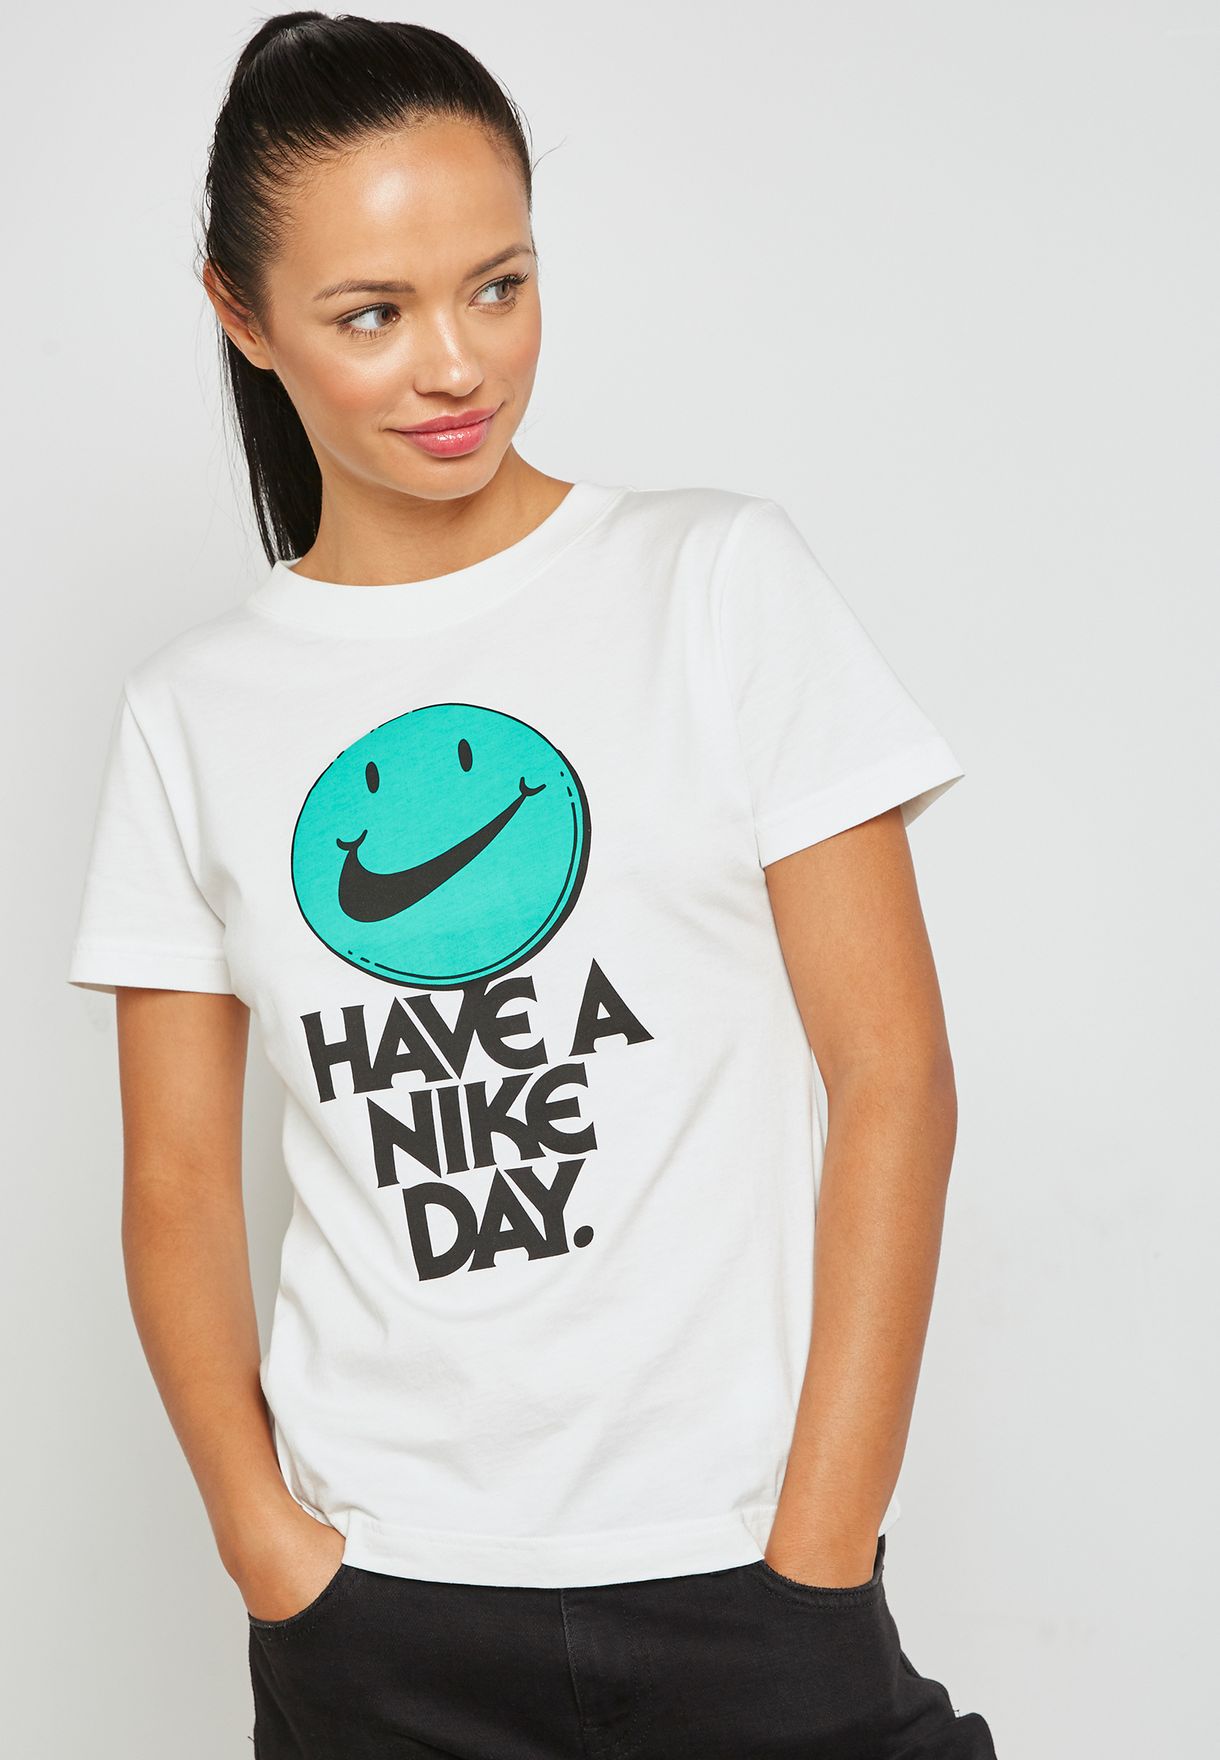 nike have a nice day t shirt